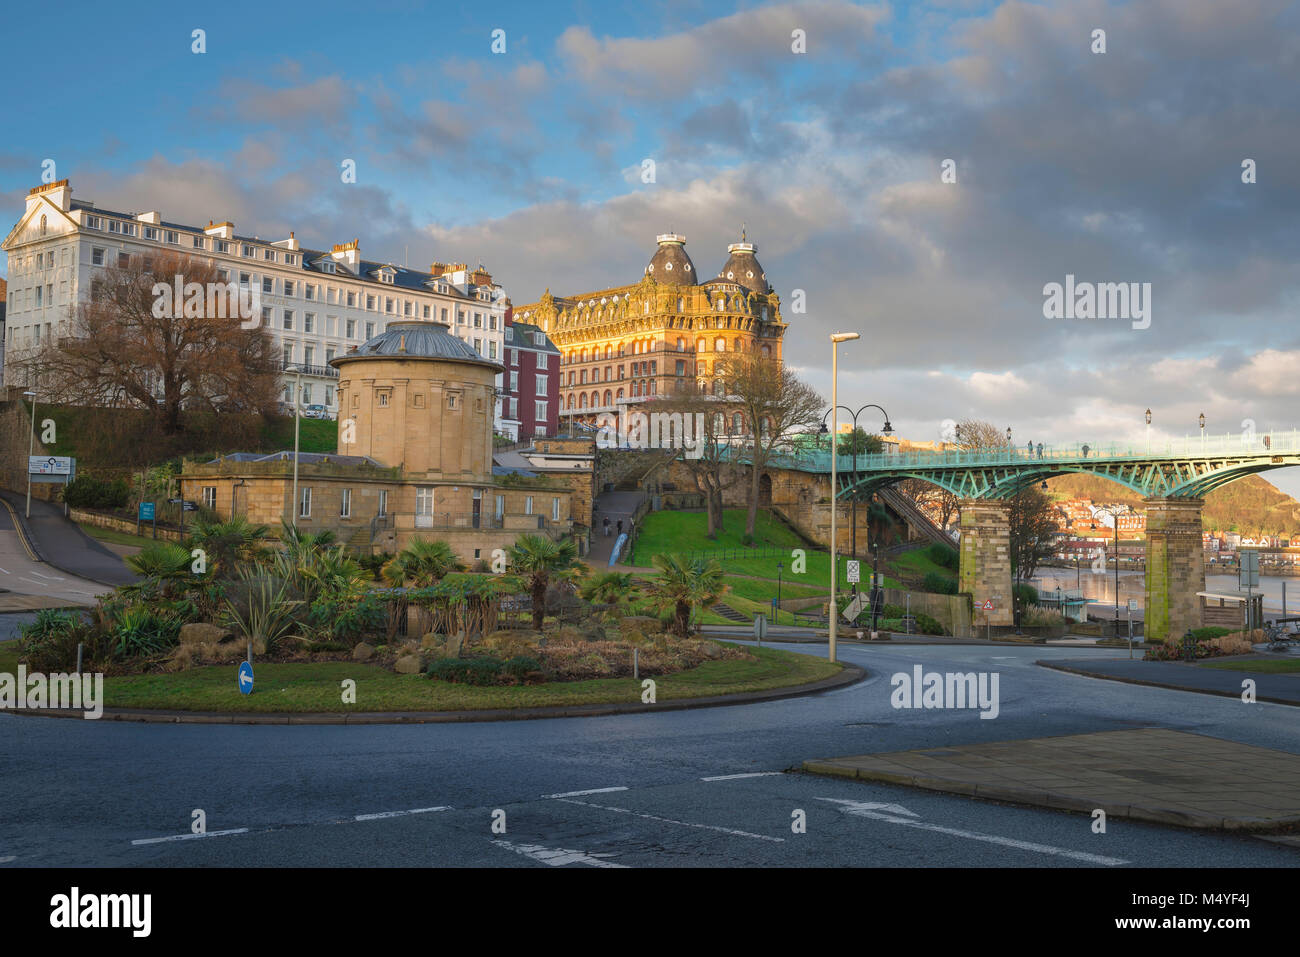 Scarborough UK, view of the Rotunda Museum, the Grand Hotel and the Spa Bridge from the Valley Road in Scarborough. North Yorkshire. Stock Photo